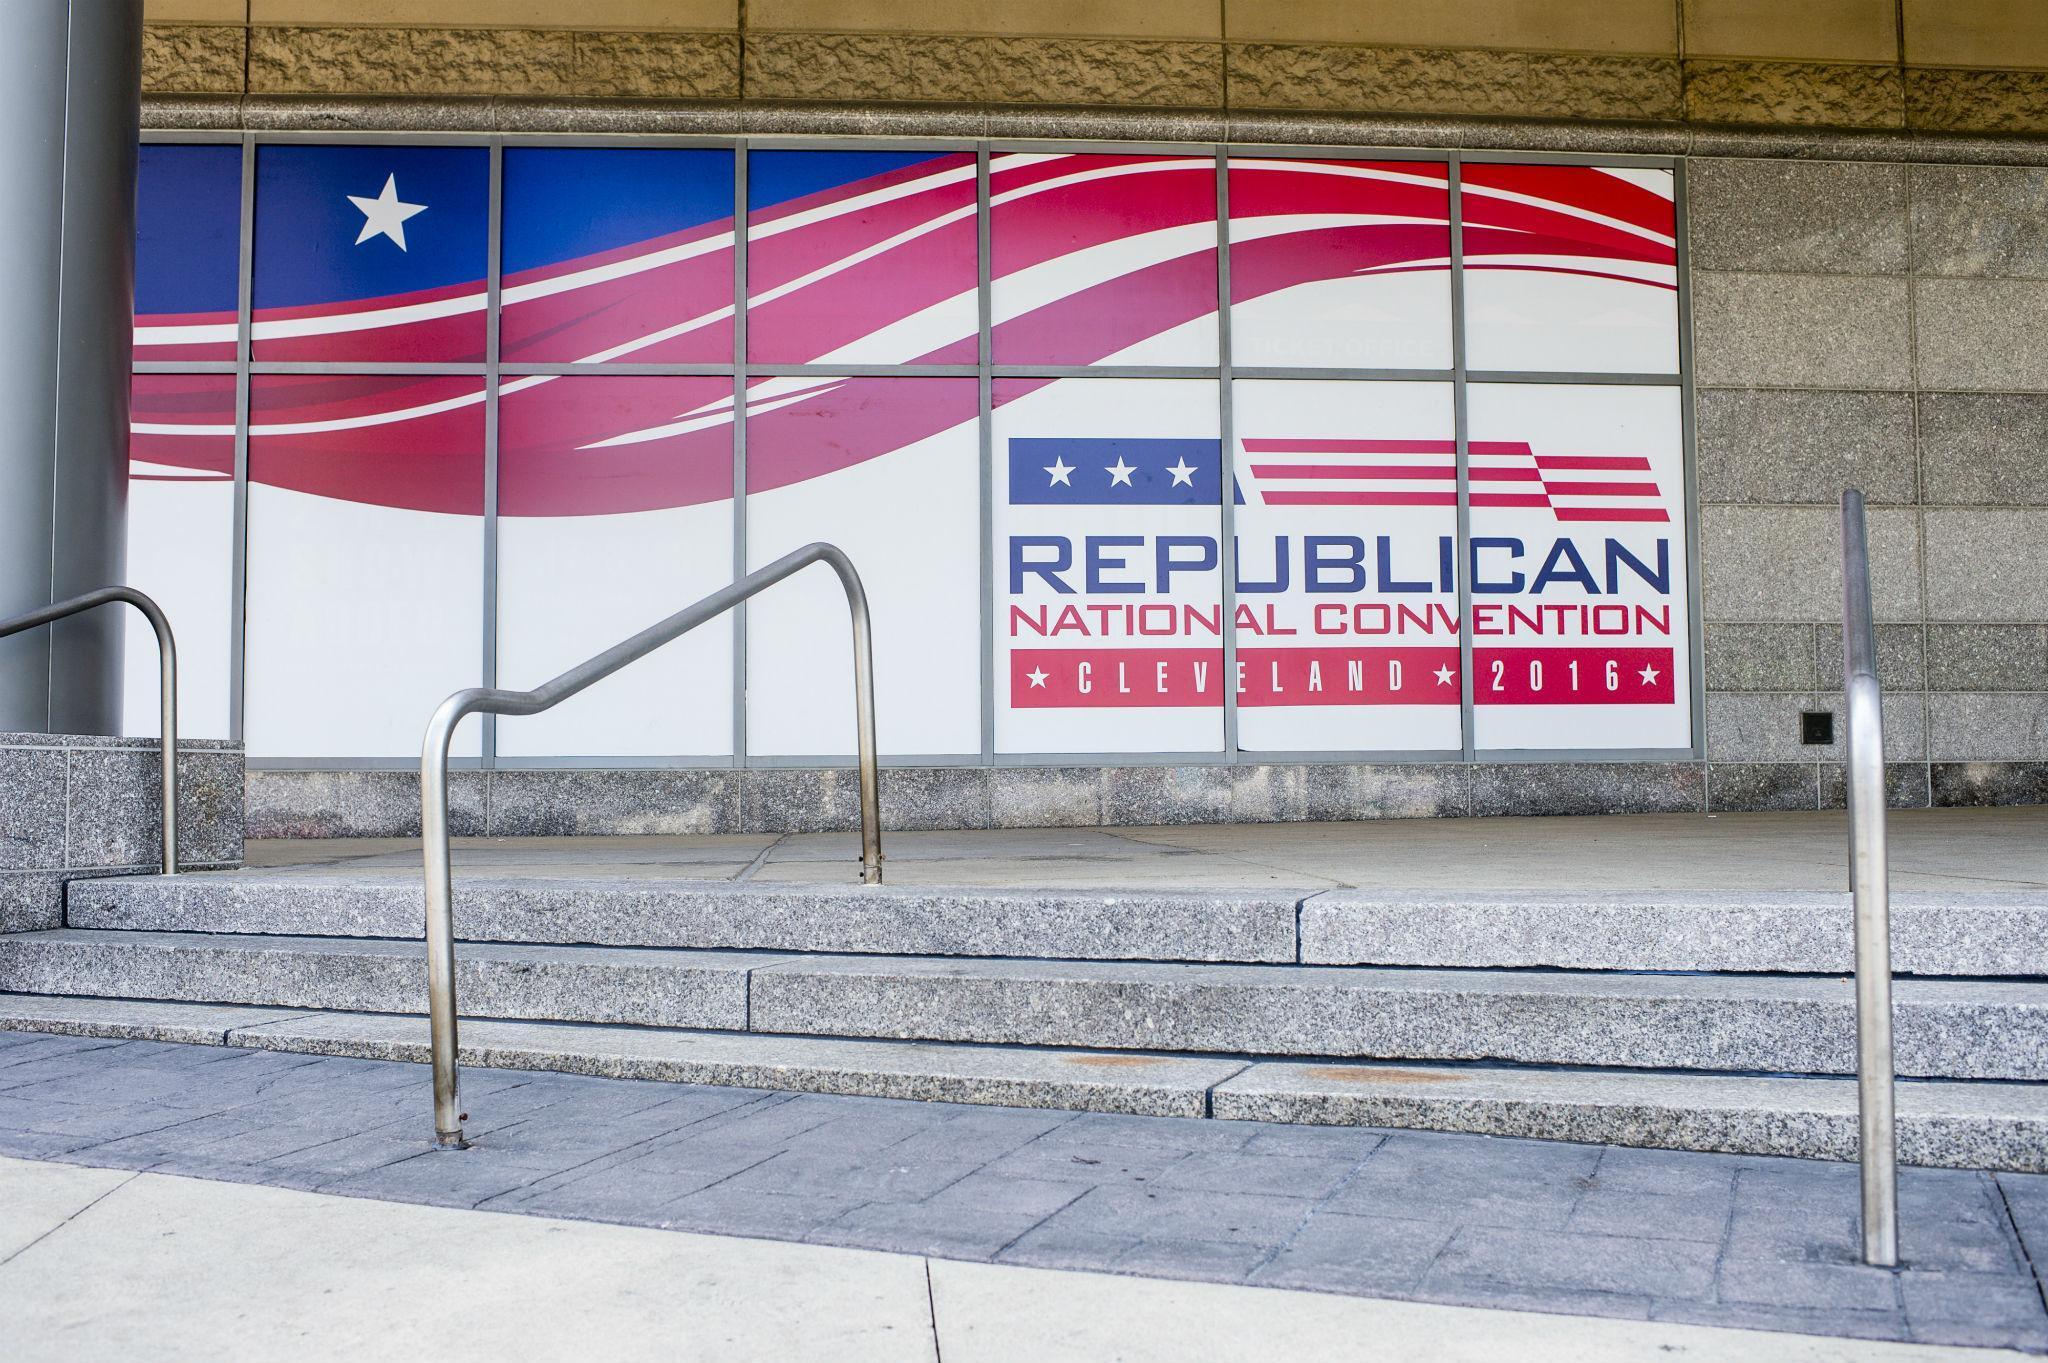 Republicans are finalising their 2016 election manifesto ahead of next week's GOP convention in Cleveland